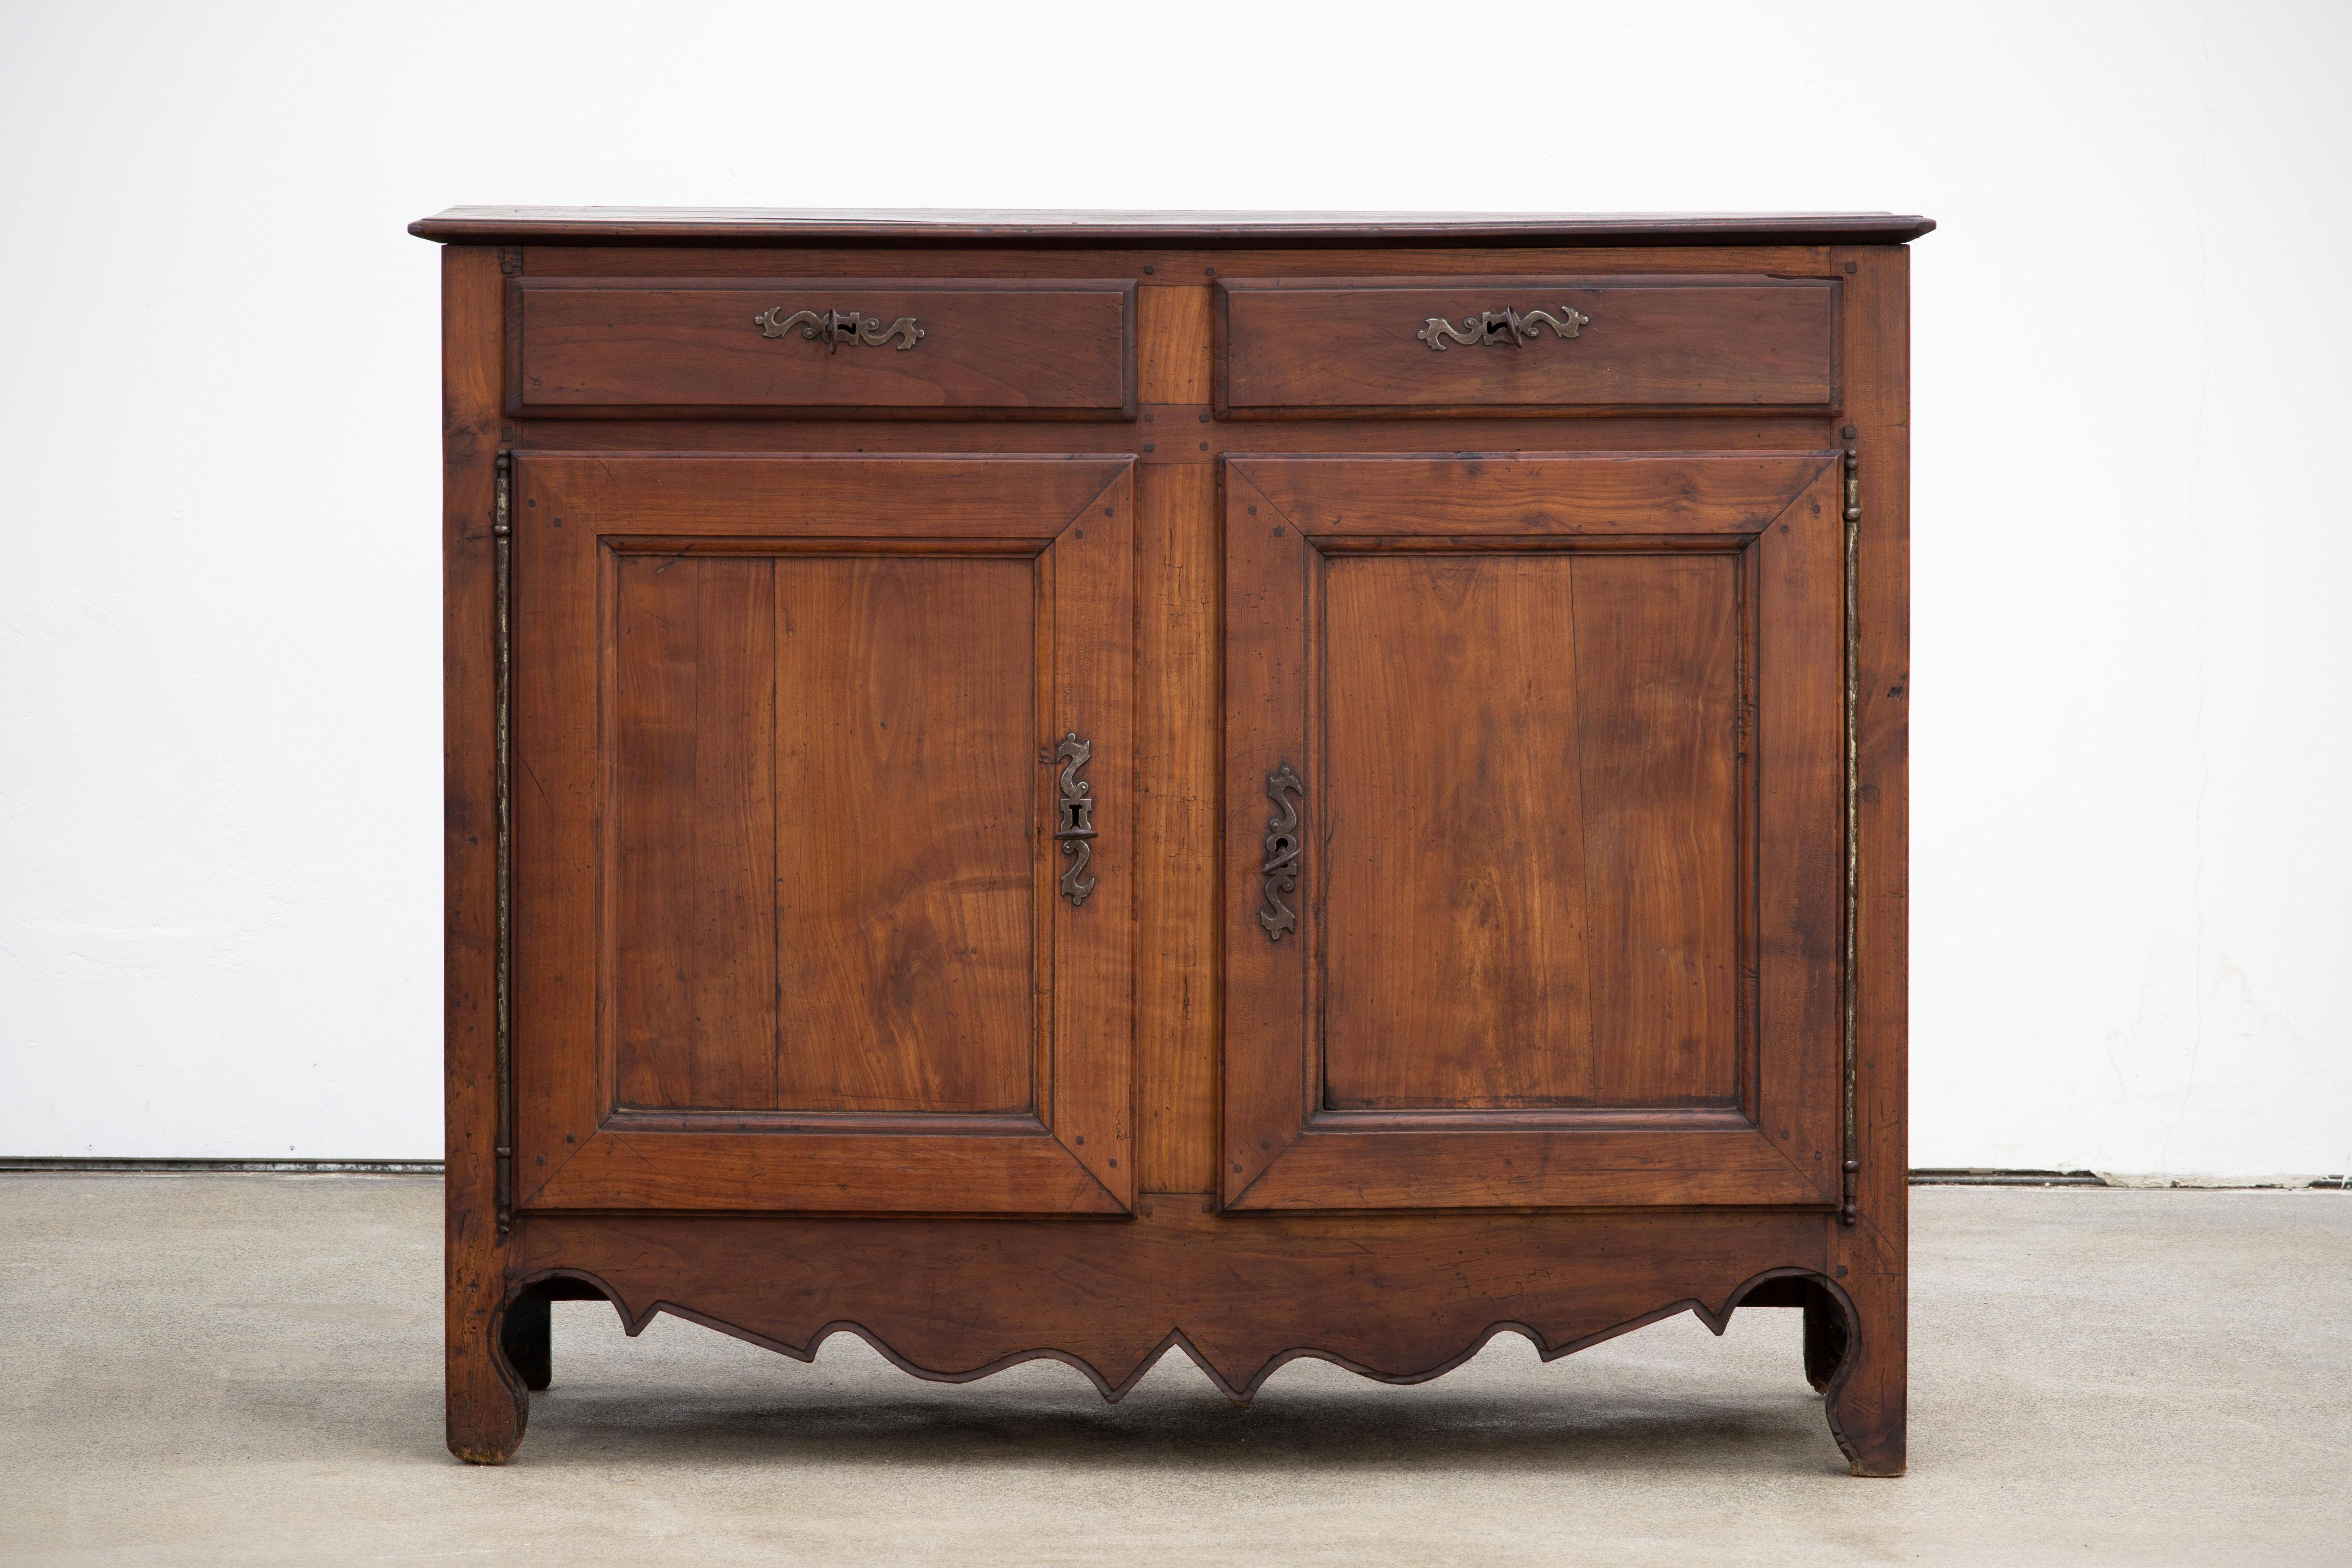 A two door and drawer provencal cabinet from France, circa 1890. Representing the casual yet refined aesthetic of the French countryside, finished in a contemporary bright finish, enhancing the natural textured figure of the wood and subtle carved